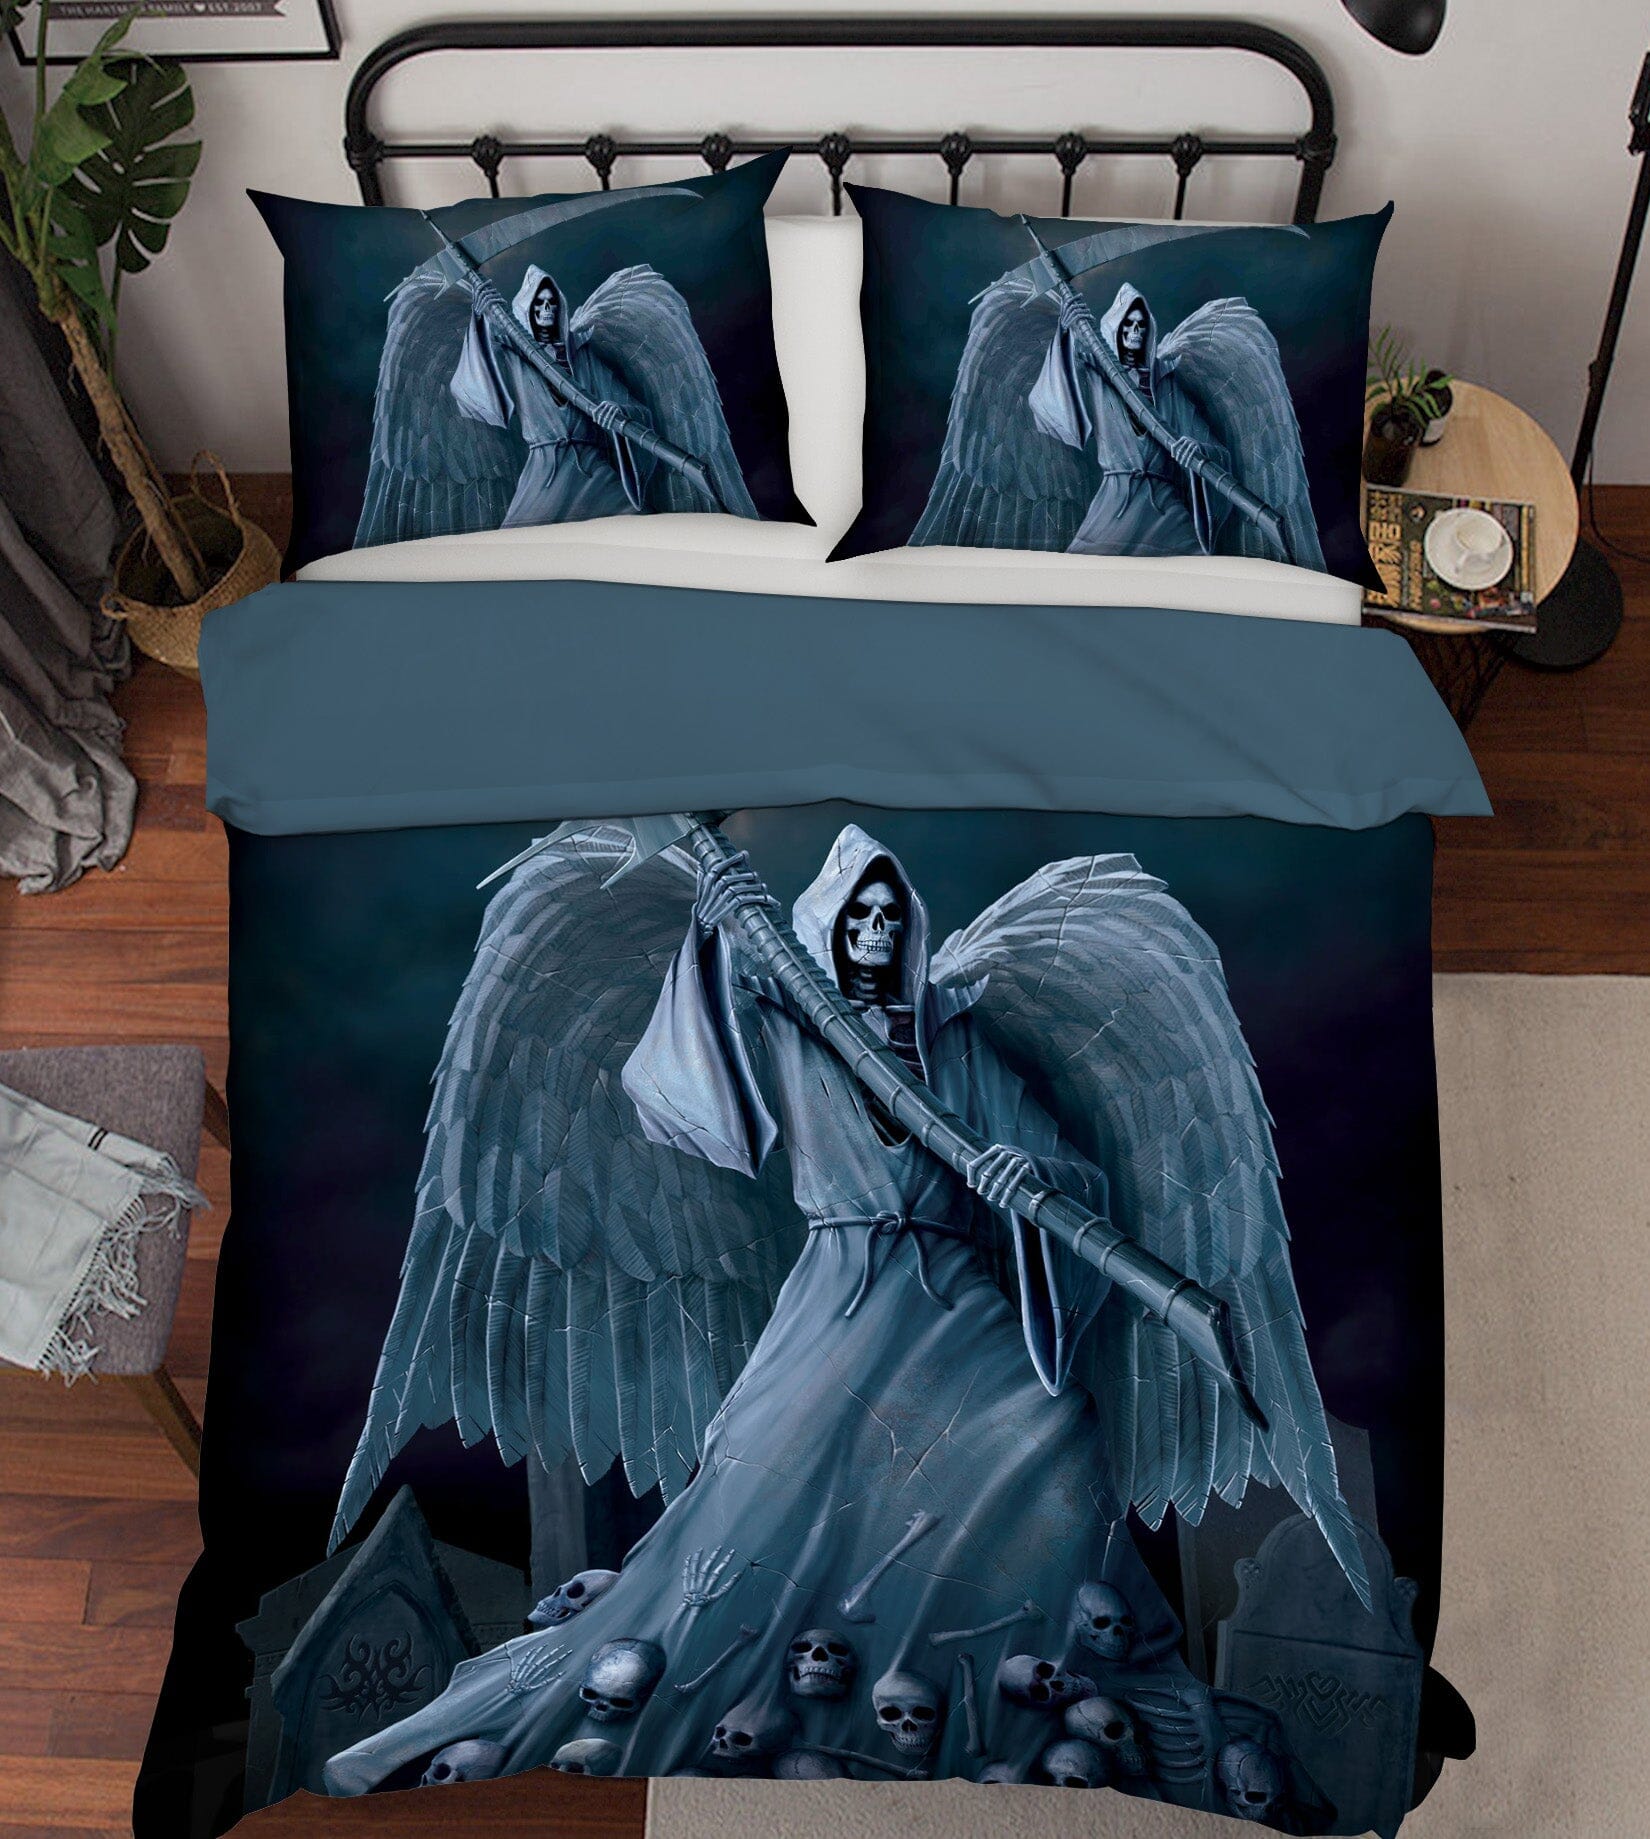 3D Death On A Hold 038 Bed Pillowcases Quilt Exclusive Designer Vincent Quiet Covers AJ Creativity Home 